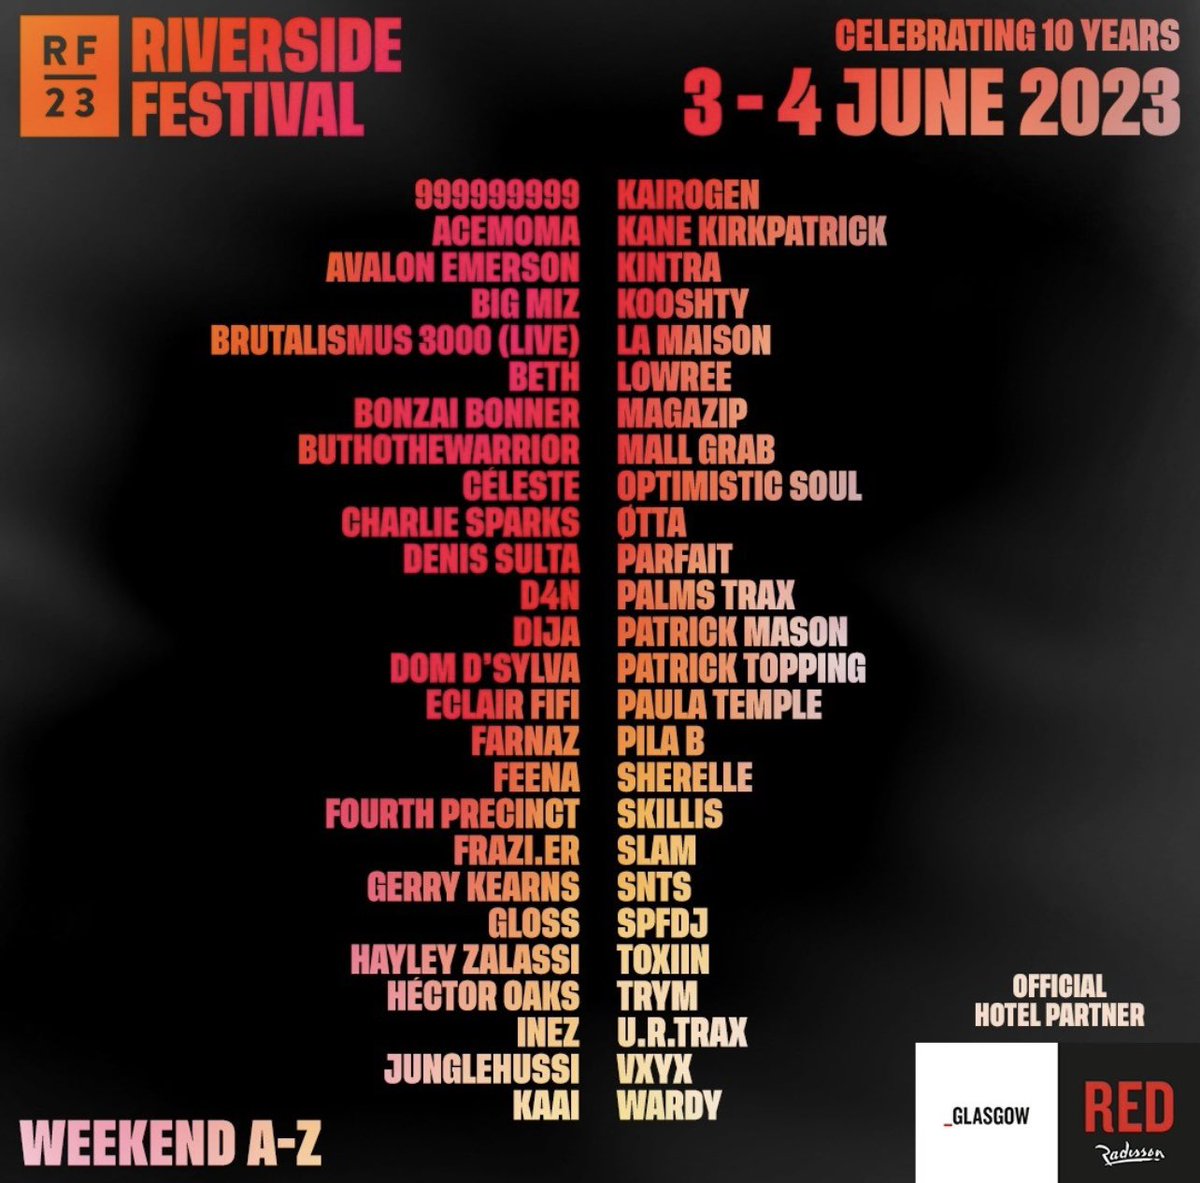 2x Tickets for sale for Riverside Festival Glasgow, Sunday 4th June. 
Bought for £65 each, open to offers! 
Please share 🙏🏽 
#riversidefestival #festival #tickets #forsale #ticketsforsale #rave #festivaltickets #techno